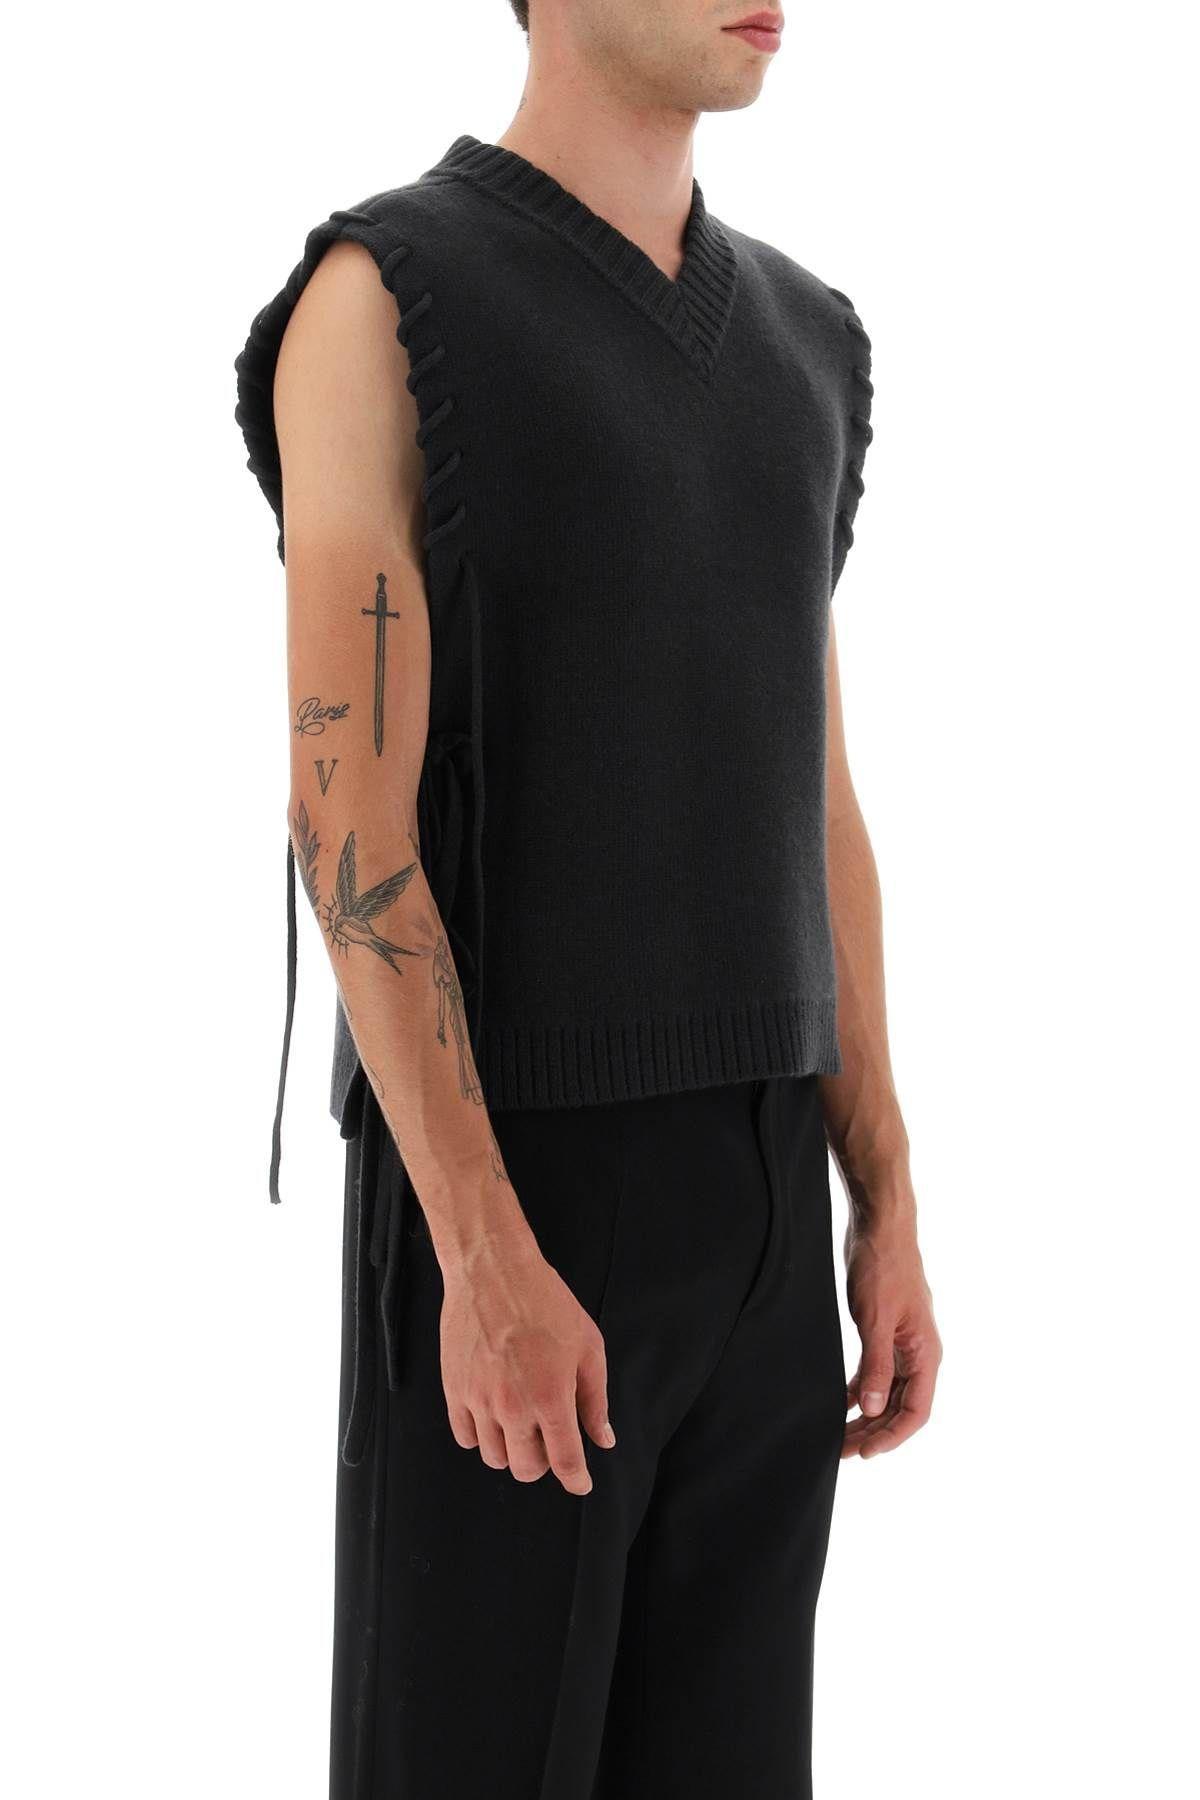 Craig Green Wool Vest With Laces in Black for Men | Lyst